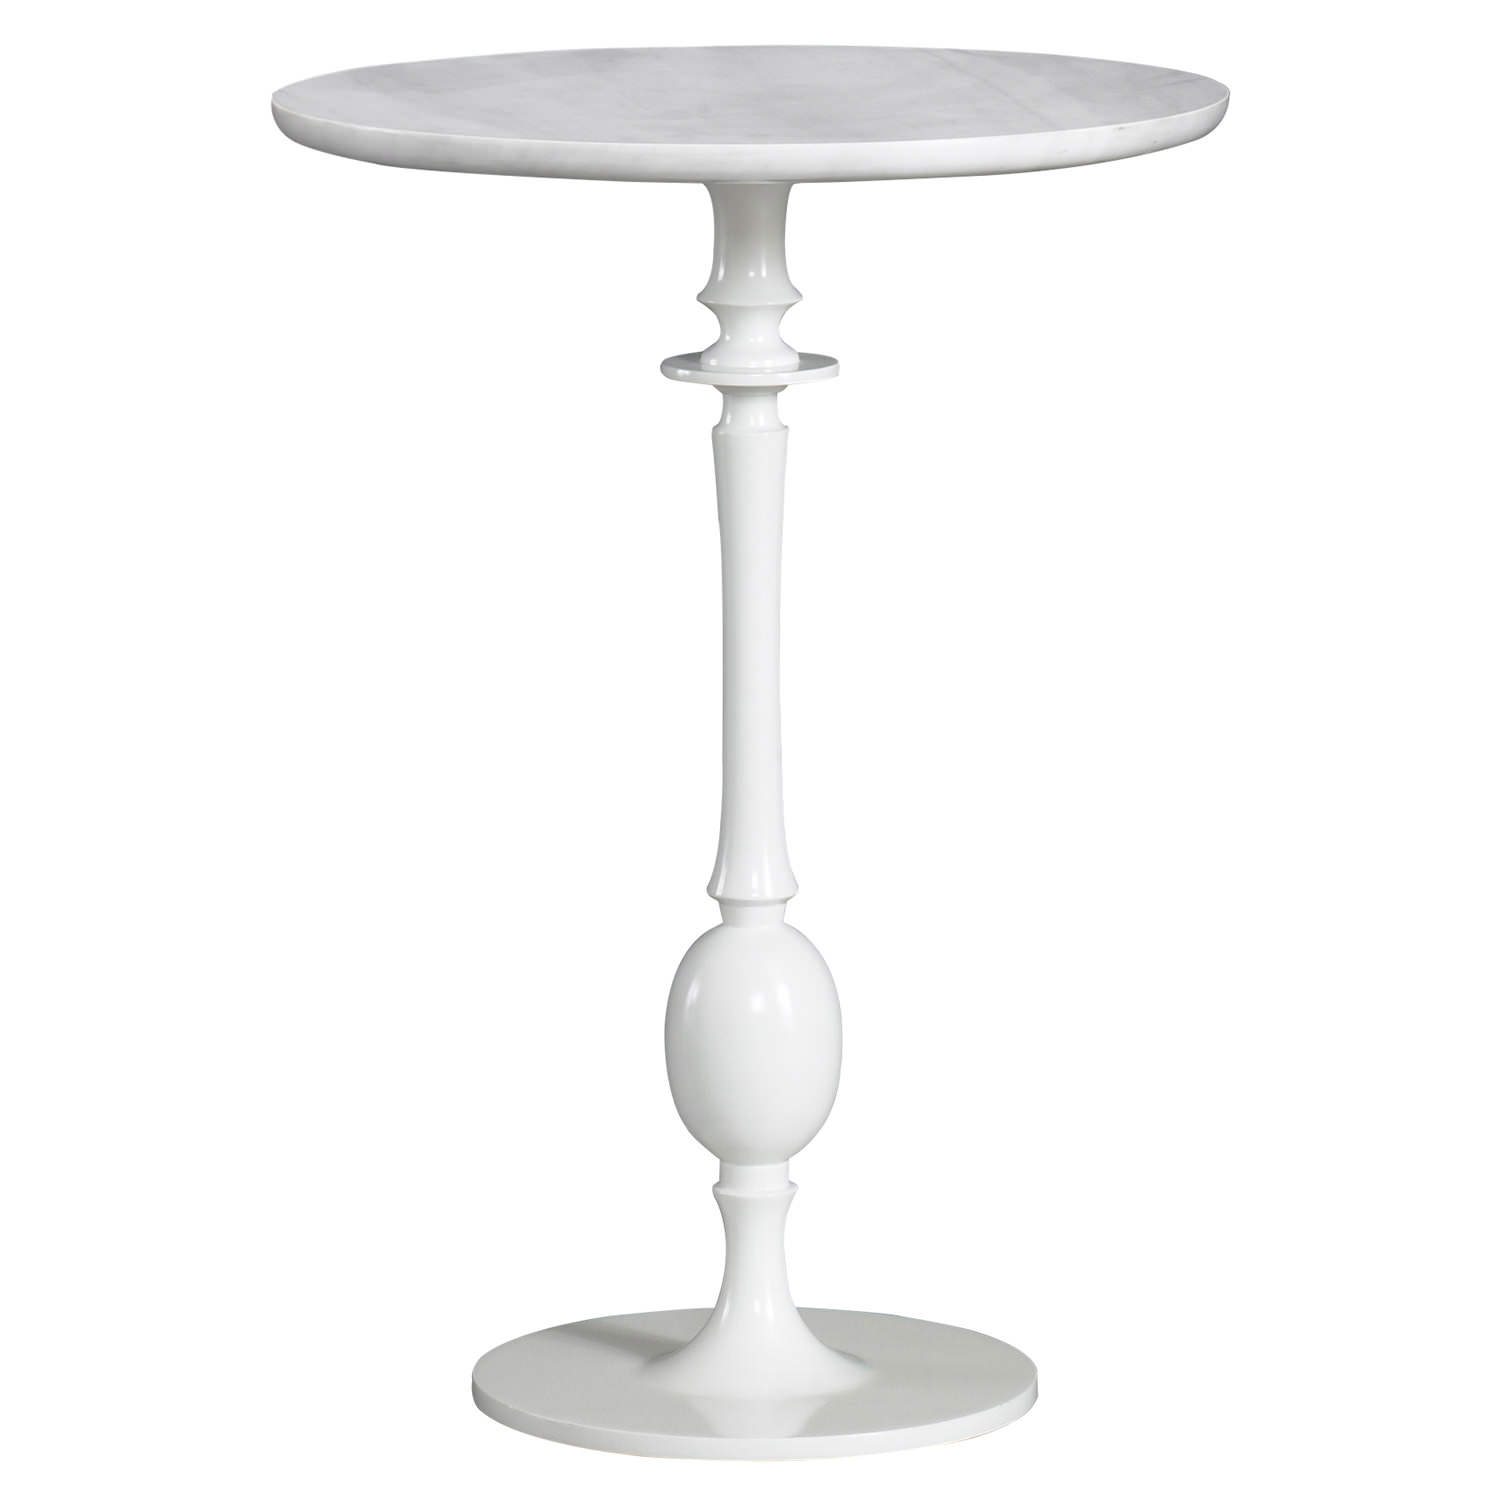 build pedestal accent table khandzoo home decor white metal inspiration gallery from drop leaf storage cabinets large wooden legs outdoor extension round bedside modern dining